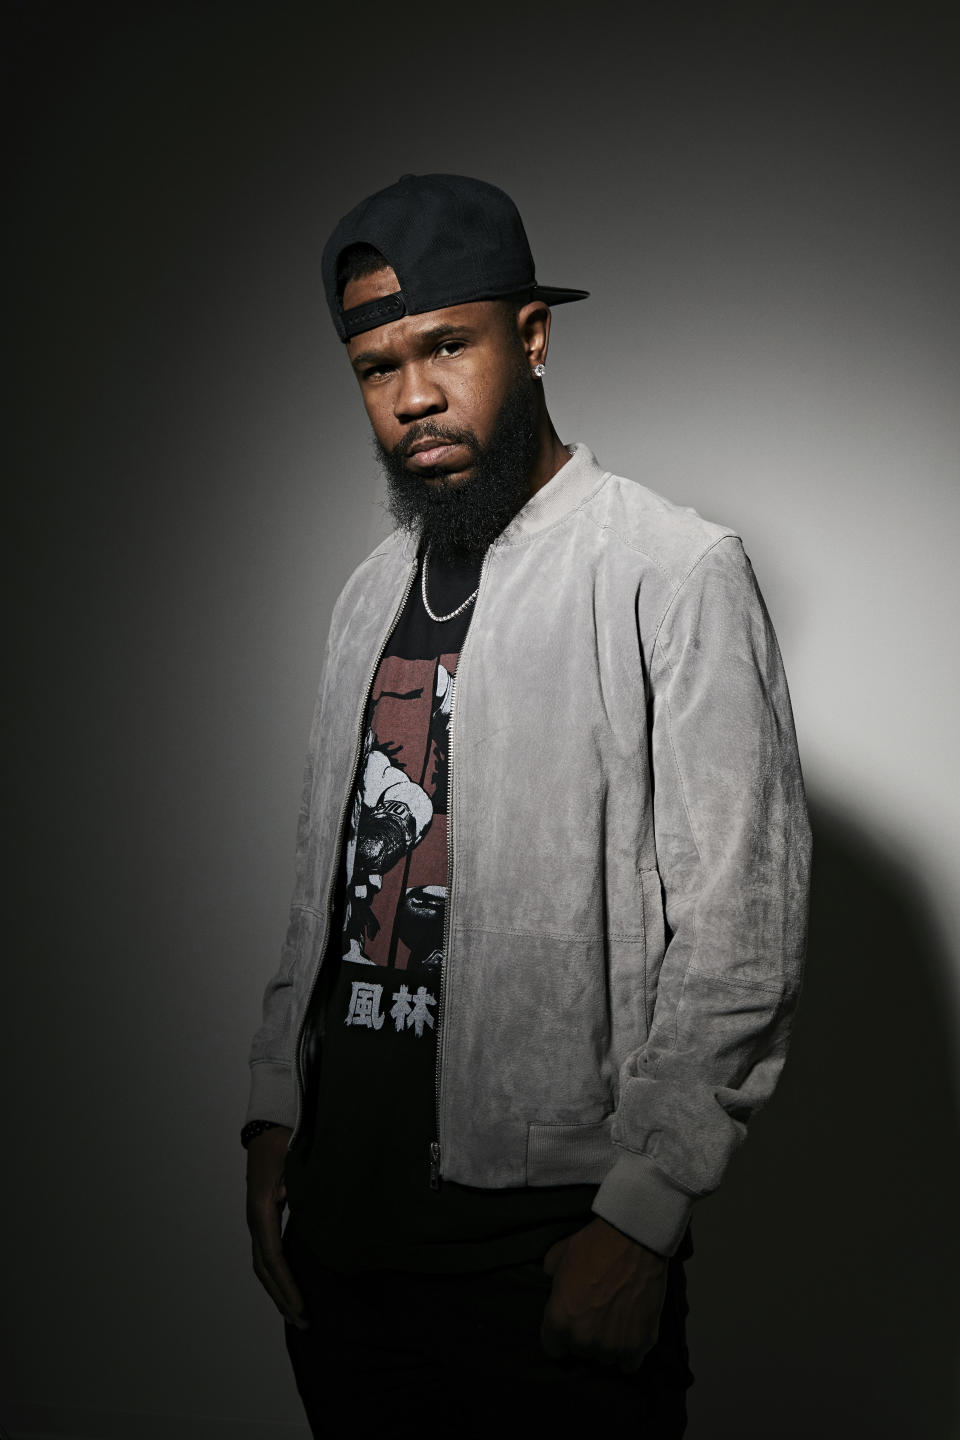 This Nov. 18, 2019 photo shows Grammy award-winning rapper Chamillionaire posing for a portrait in New York. A co-founder of popular underground Texas group the Color Changin’ Click, is best known for his hit “Ridin Dirty.” (Photo by Matt Licari/Invision/AP)